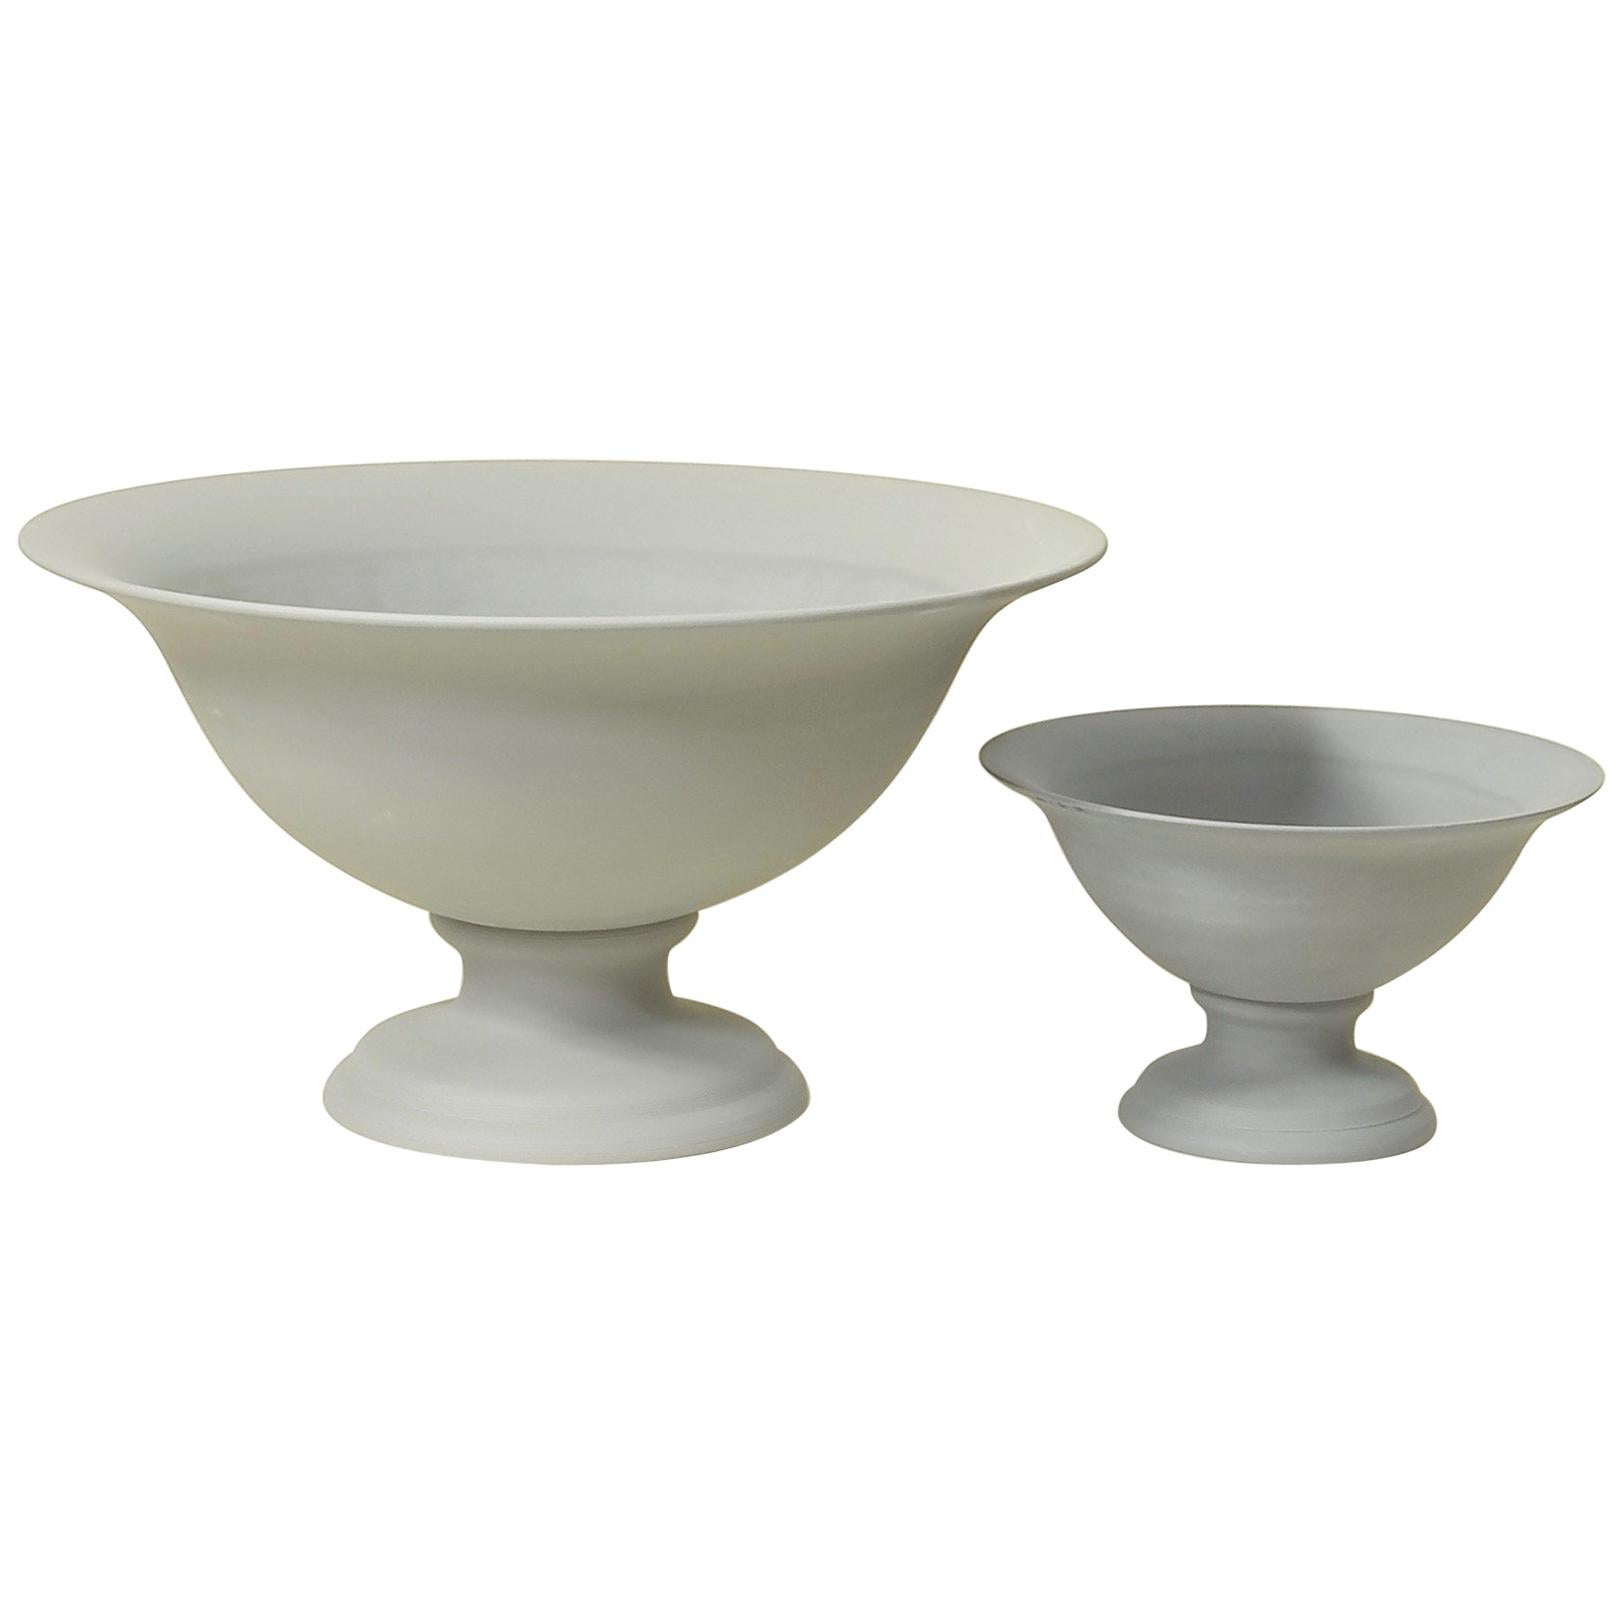 Small Footed Porcelain Vaso Planter in Matte Steel Grey